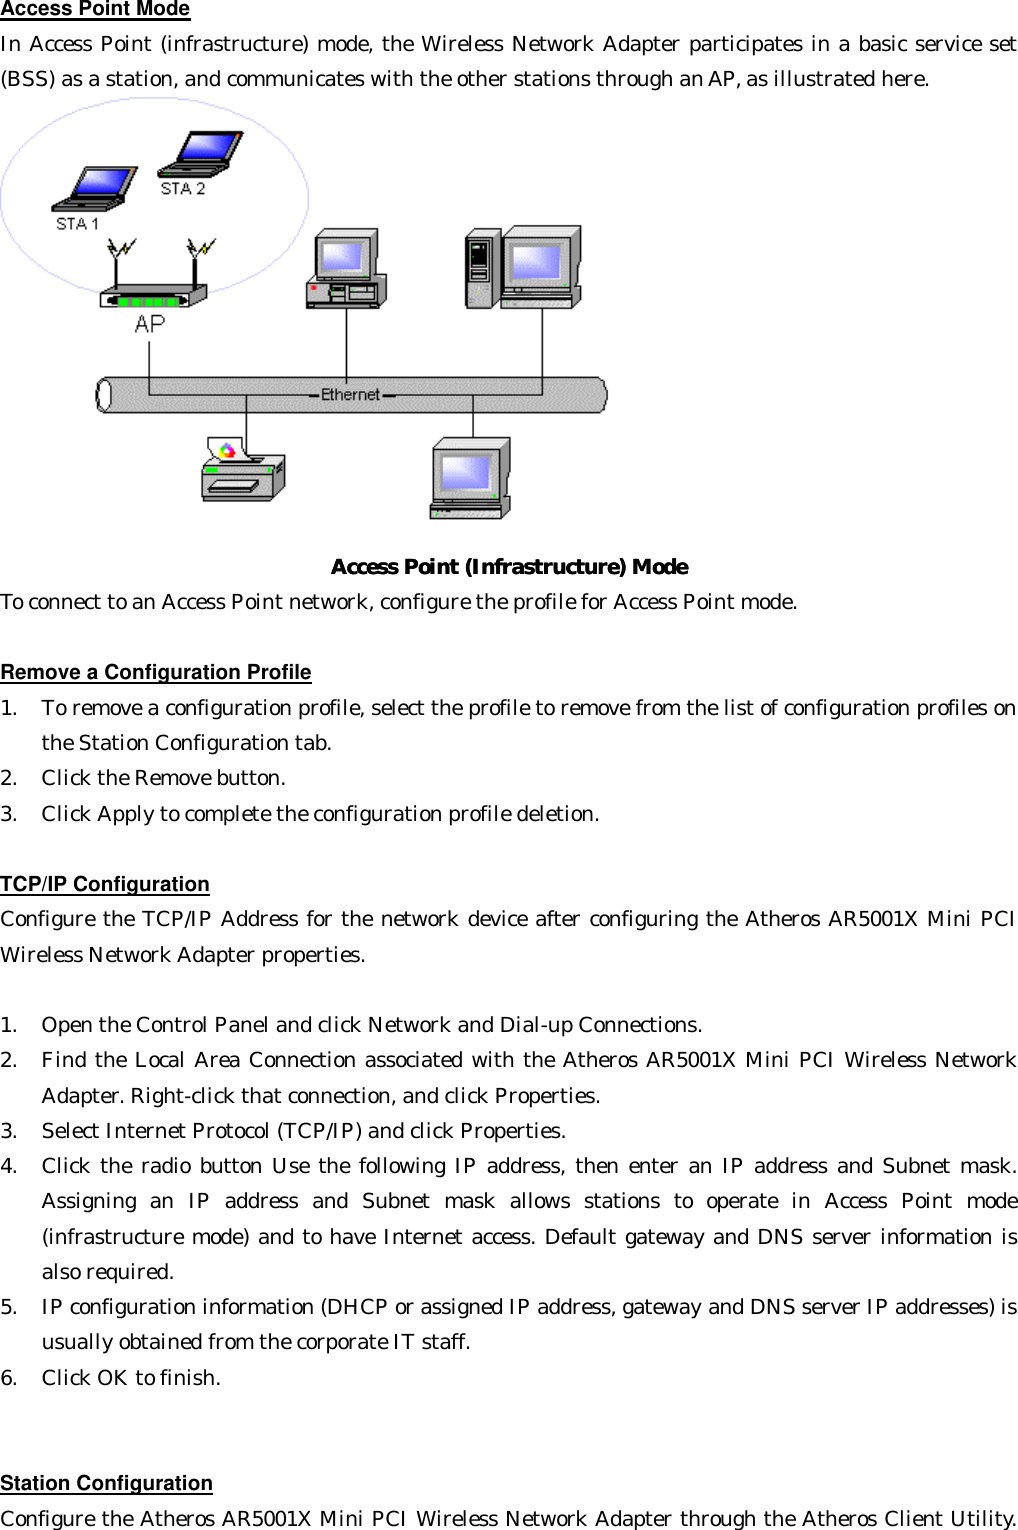 Access Point Mode In Access Point (infrastructure) mode, the Wireless Network Adapter participates in a basic service set (BSS) as a station, and communicates with the other stations through an AP, as illustrated here. Access Point (Infrastructure) ModeAccess Point (Infrastructure) Mode  To connect to an Access Point network, configure the profile for Access Point mode.  Remove a Configuration Profile 1. To remove a configuration profile, select the profile to remove from the list of configuration profiles on the Station Configuration tab. 2. Click the Remove button. 3. Click Apply to complete the configuration profile deletion.    TCP/IP Configuration Configure the TCP/IP Address for the network device after configuring the Atheros AR5001X Mini PCI Wireless Network Adapter properties.  1. Open the Control Panel and click Network and Dial-up Connections. 2. Find the Local Area Connection associated with the Atheros AR5001X Mini PCI Wireless Network Adapter. Right-click that connection, and click Properties. 3. Select Internet Protocol (TCP/IP) and click Properties. 4. Click the radio button Use the following IP address, then enter an IP address and Subnet mask. Assigning an IP address and Subnet mask allows stations to operate in Access Point mode (infrastructure mode) and to have Internet access. Default gateway and DNS server information is also required.   5. IP configuration information (DHCP or assigned IP address, gateway and DNS server IP addresses) is usually obtained from the corporate IT staff. 6. Click OK to finish.     Station Configuration Configure the Atheros AR5001X Mini PCI Wireless Network Adapter through the Atheros Client Utility. 